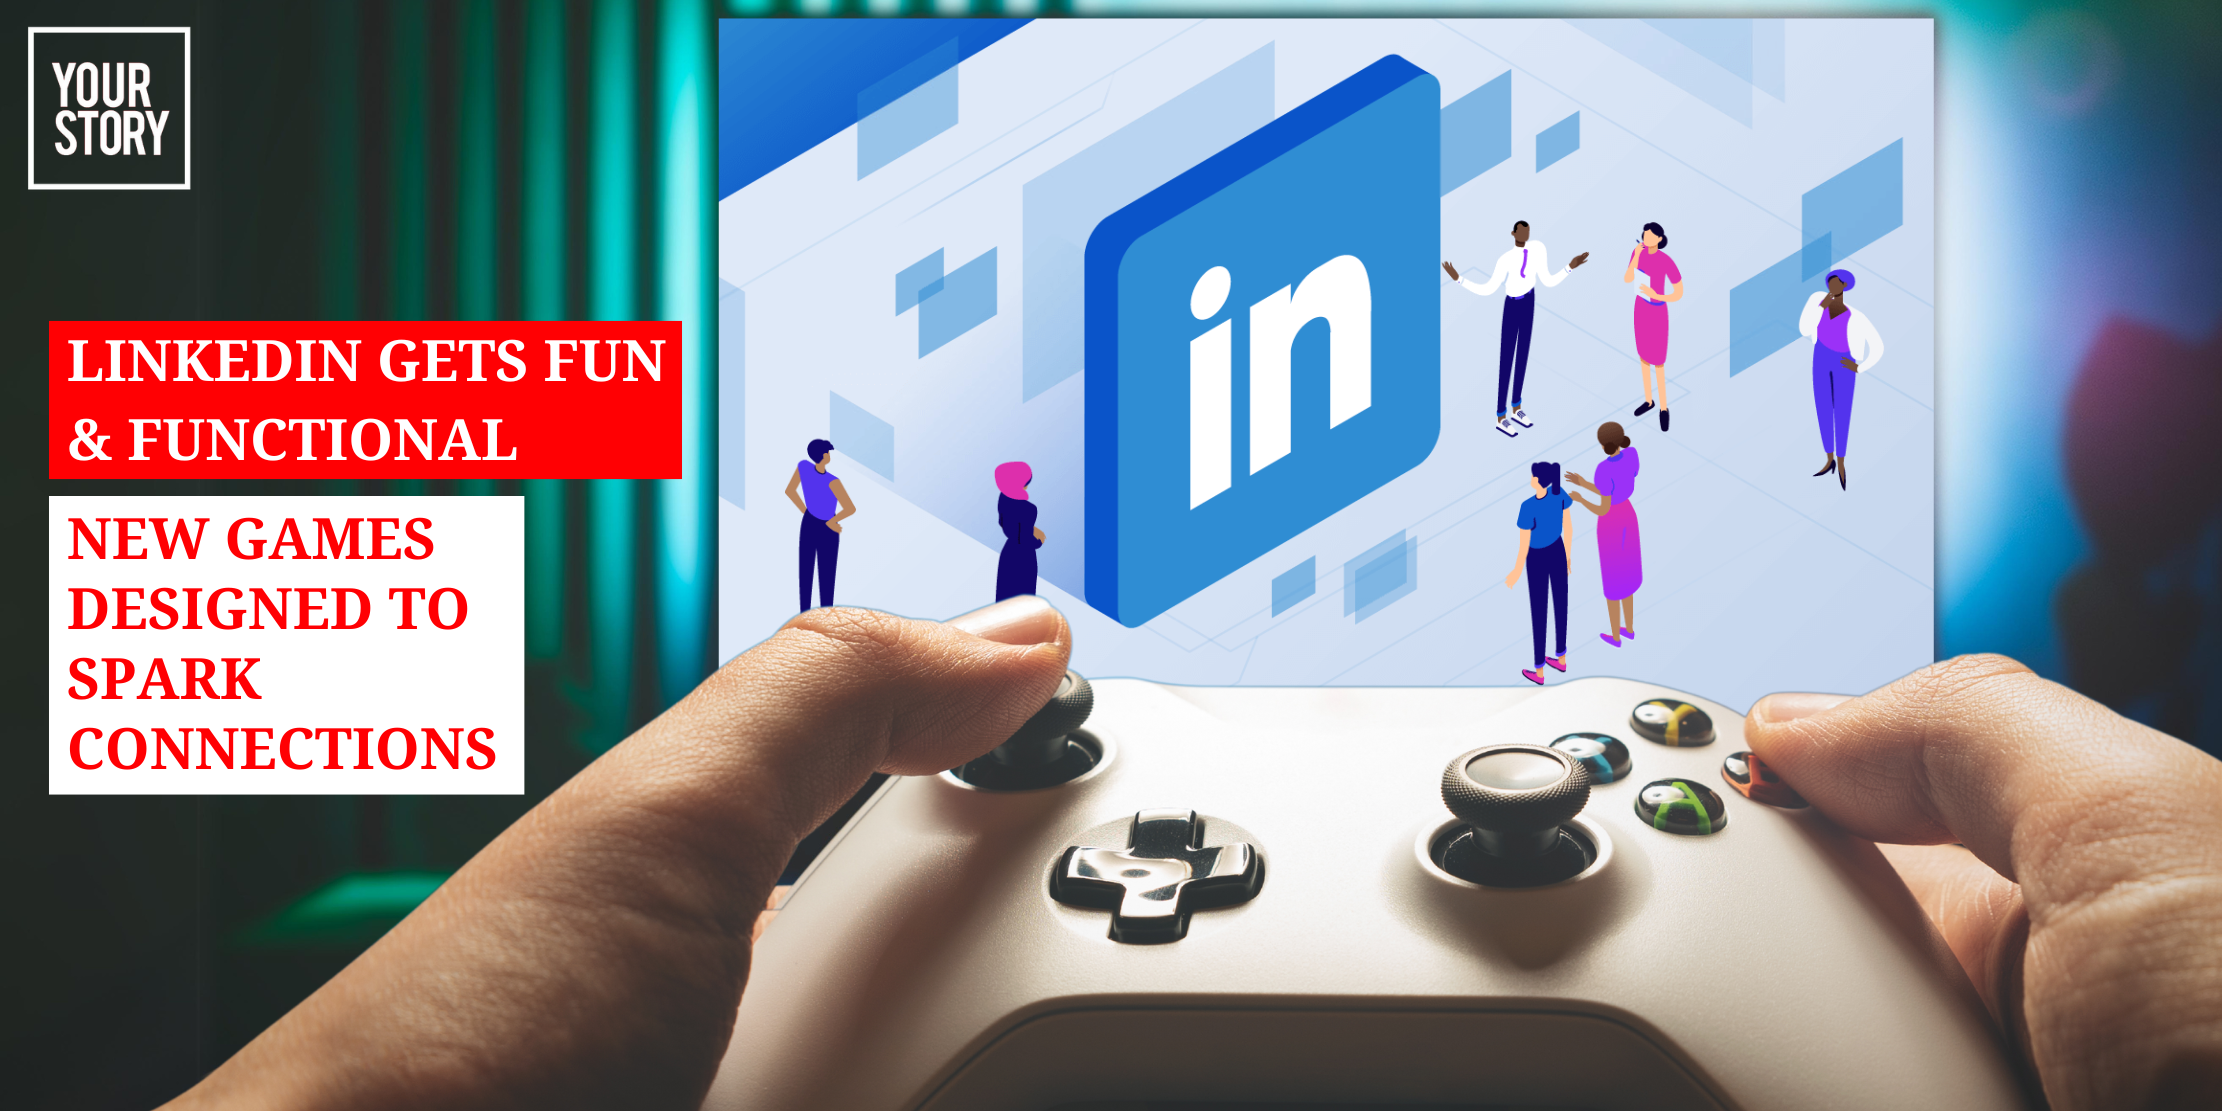 ⁠⁠LinkedIn Gets Fun & Functional: New Games Designed to Spark Connections